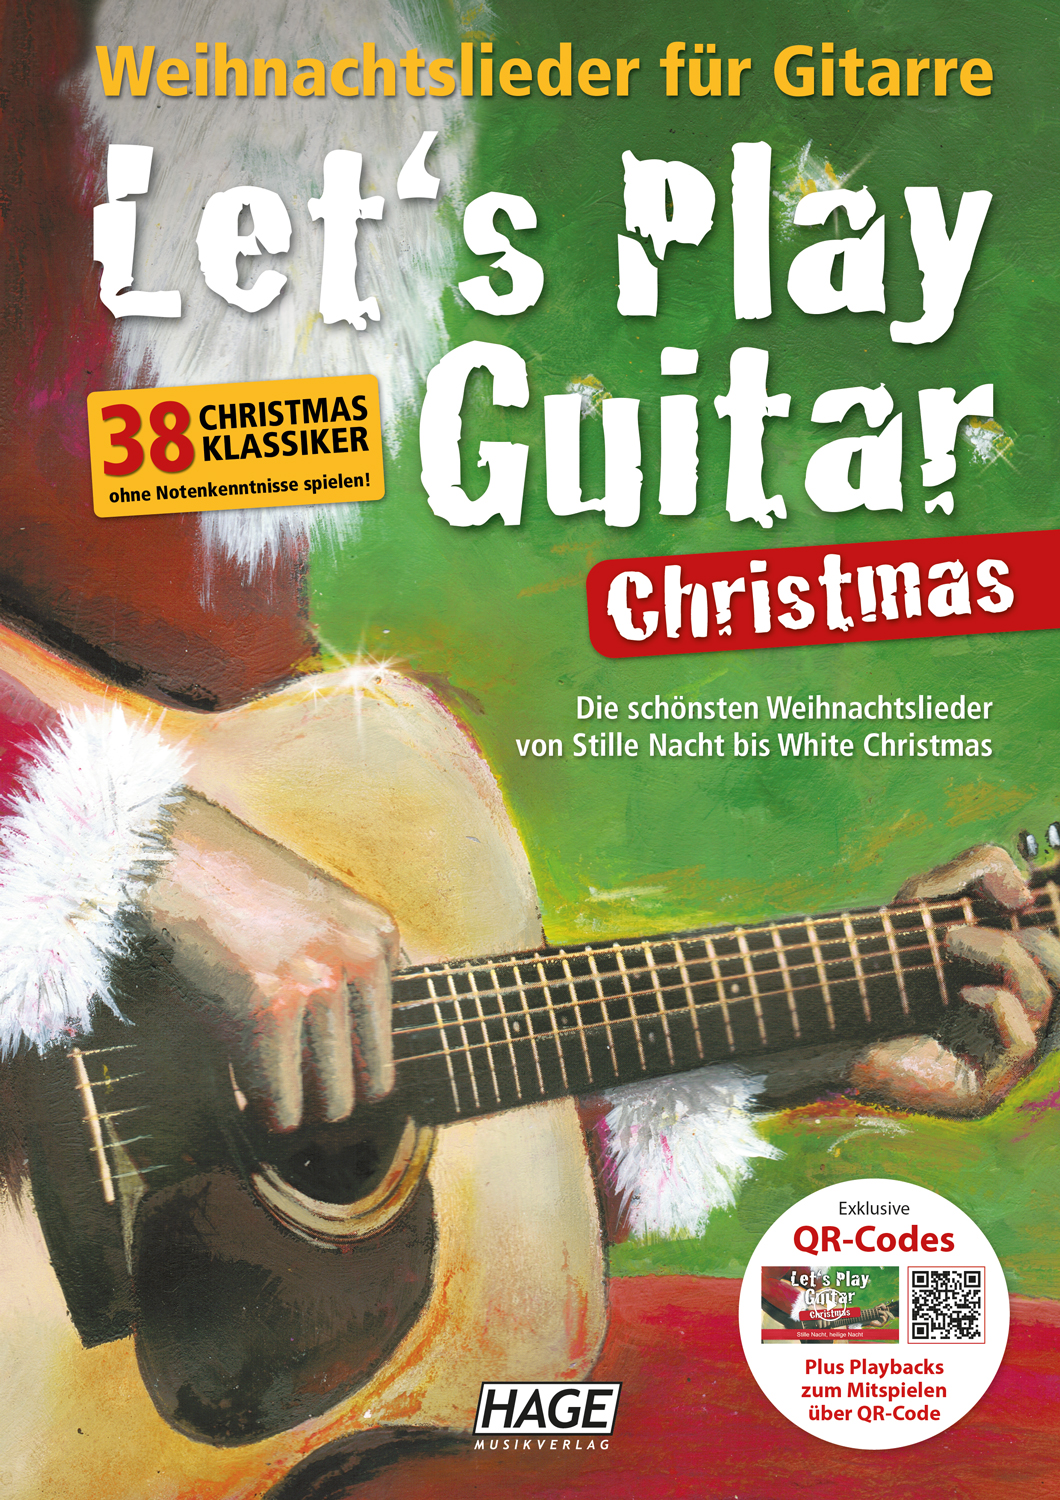 Let's Play Guitar Christmas (mit QR-Codes)